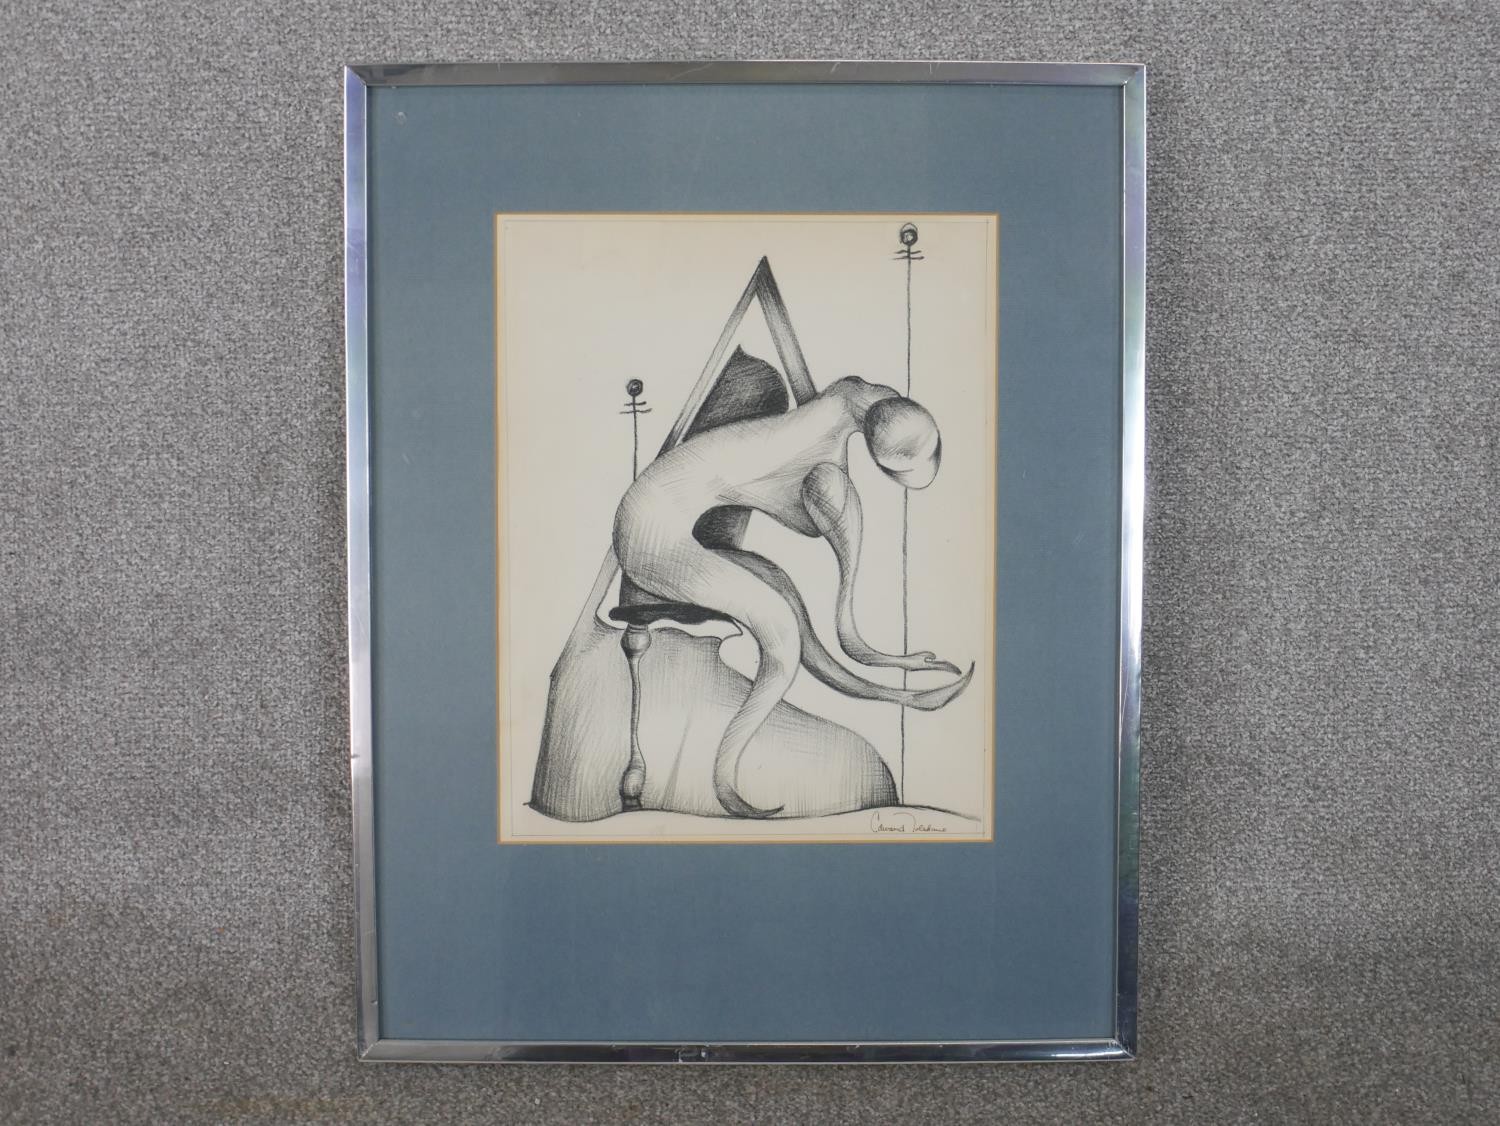 Edward Toledano (1919 - 2009), charcoal on paper, surreal figure study, signed. H.62 W.49cm